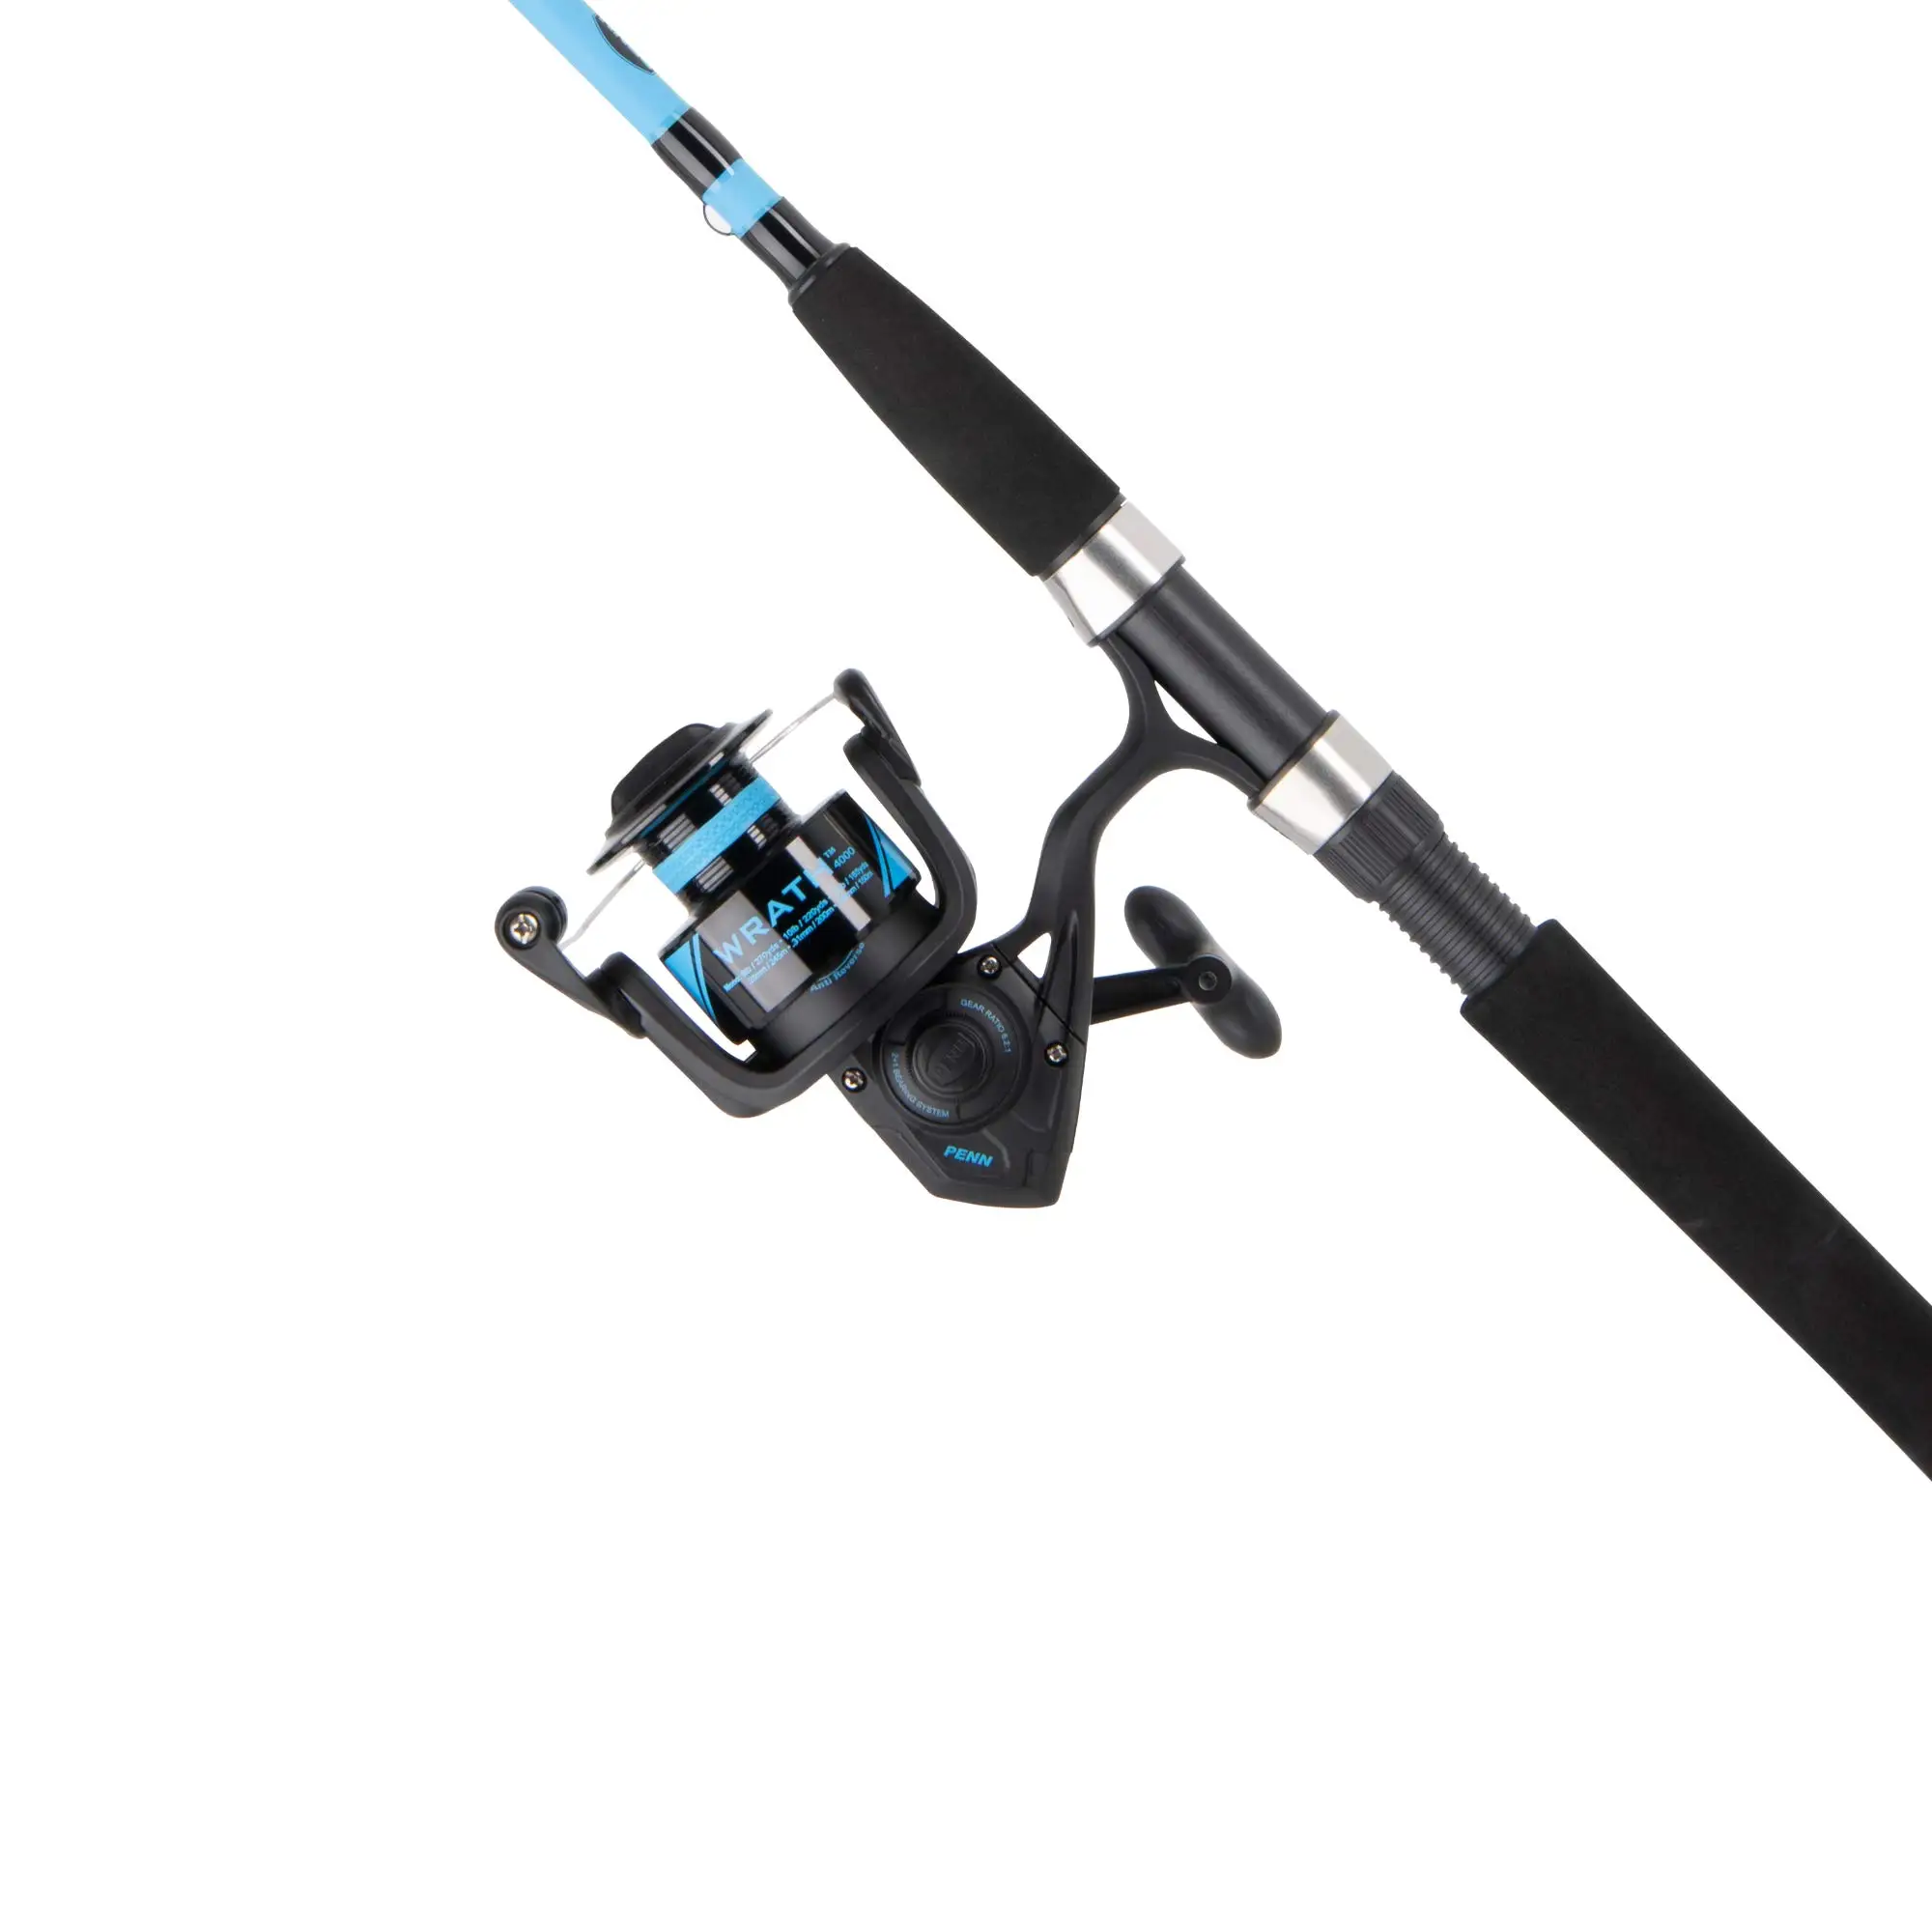 6’6” Wrath Fishing Rod and Reel Spinning Combo enlarge